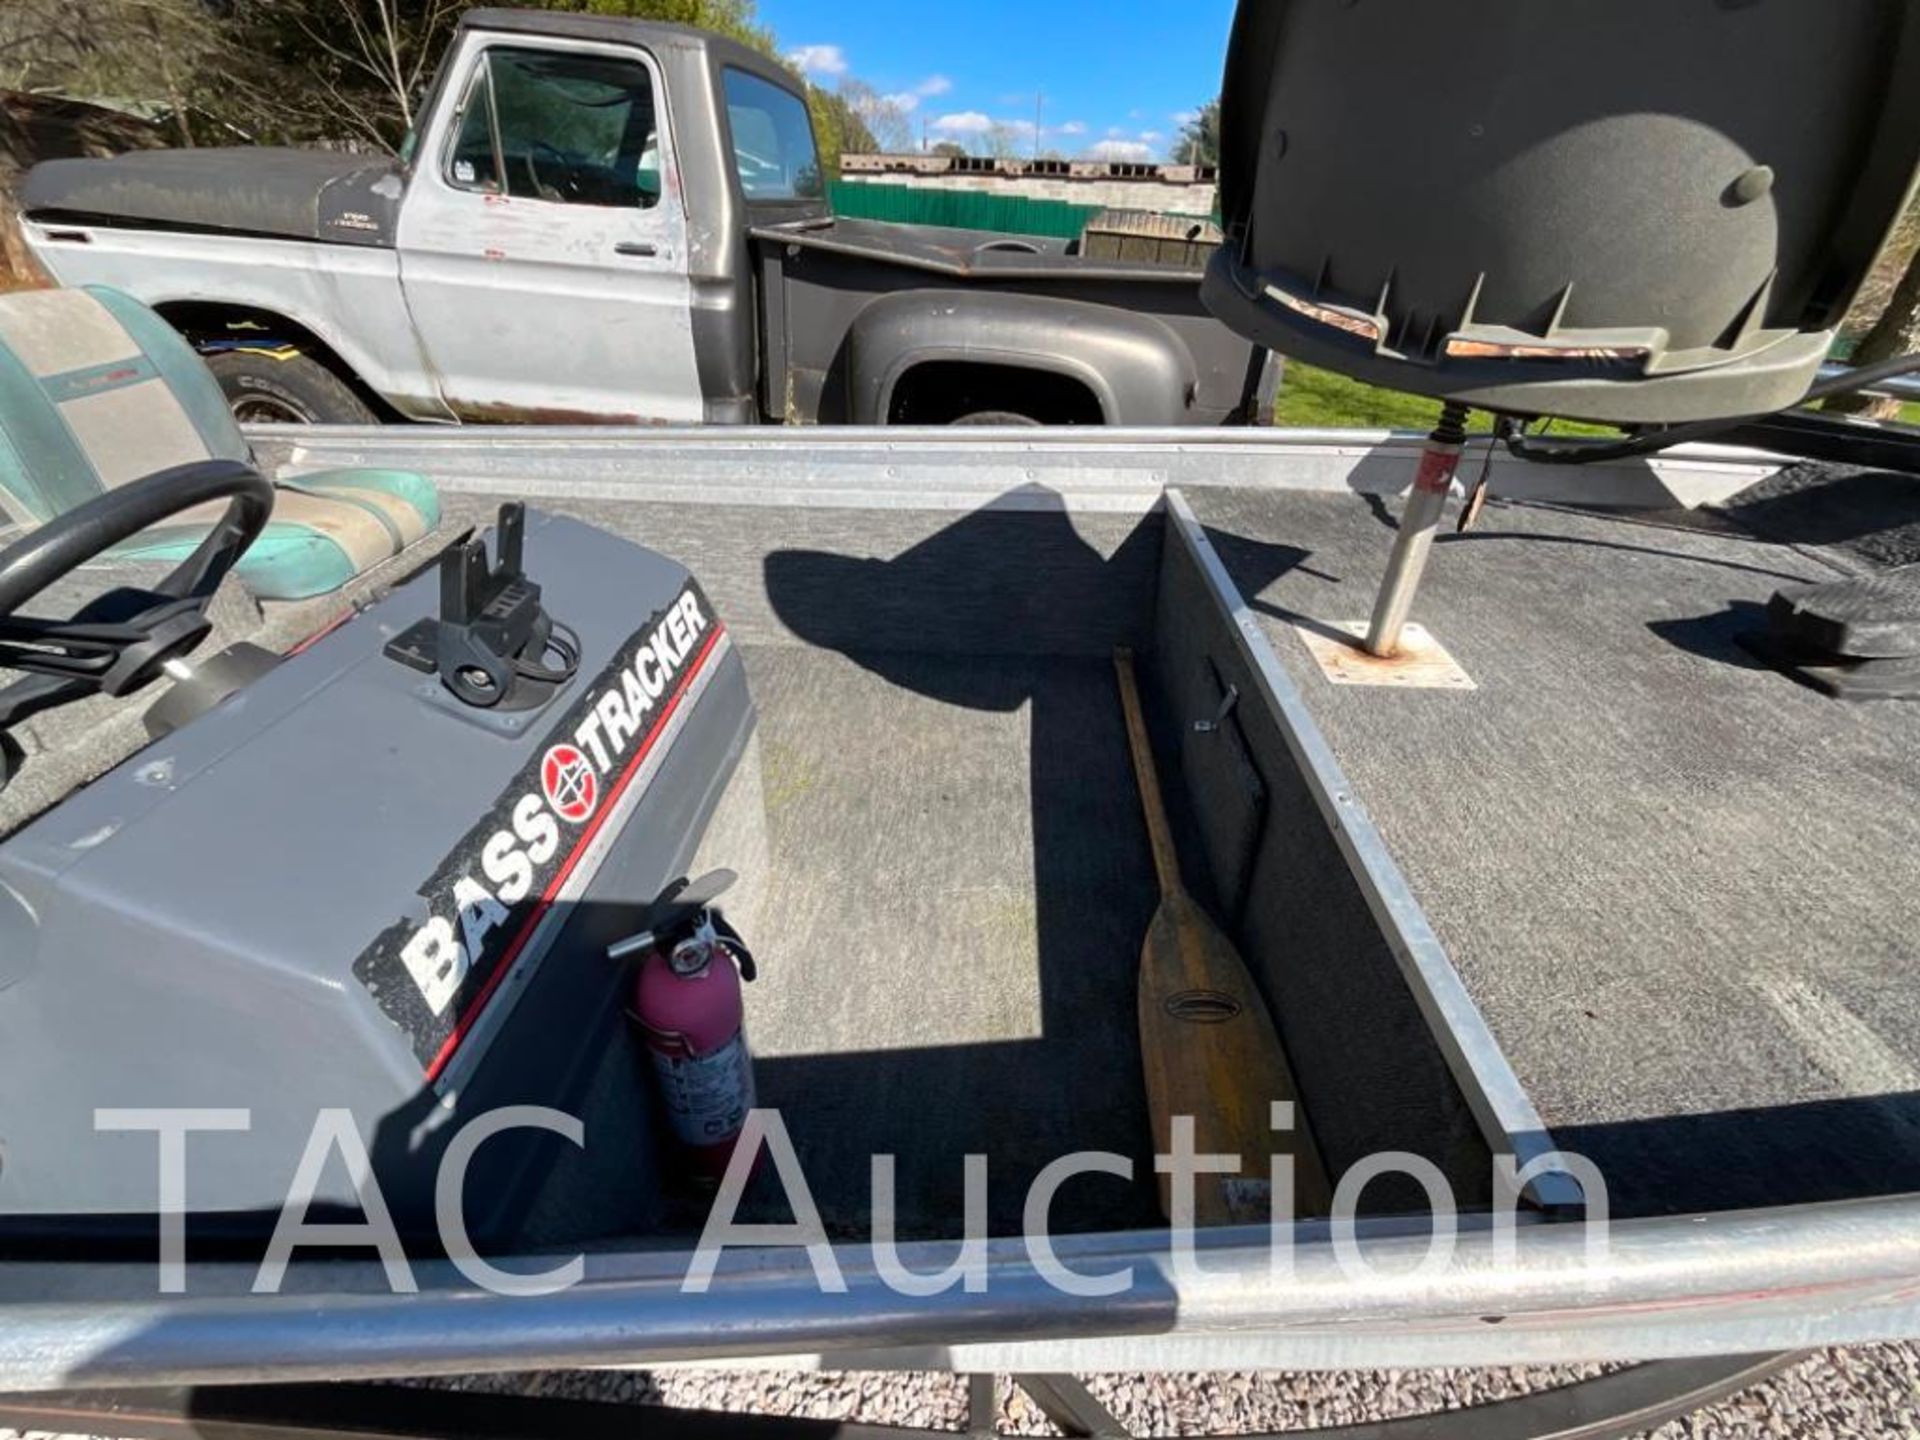 1989 Bass Tracker 17ft Bass Boat W/ Trailer - Image 16 of 52